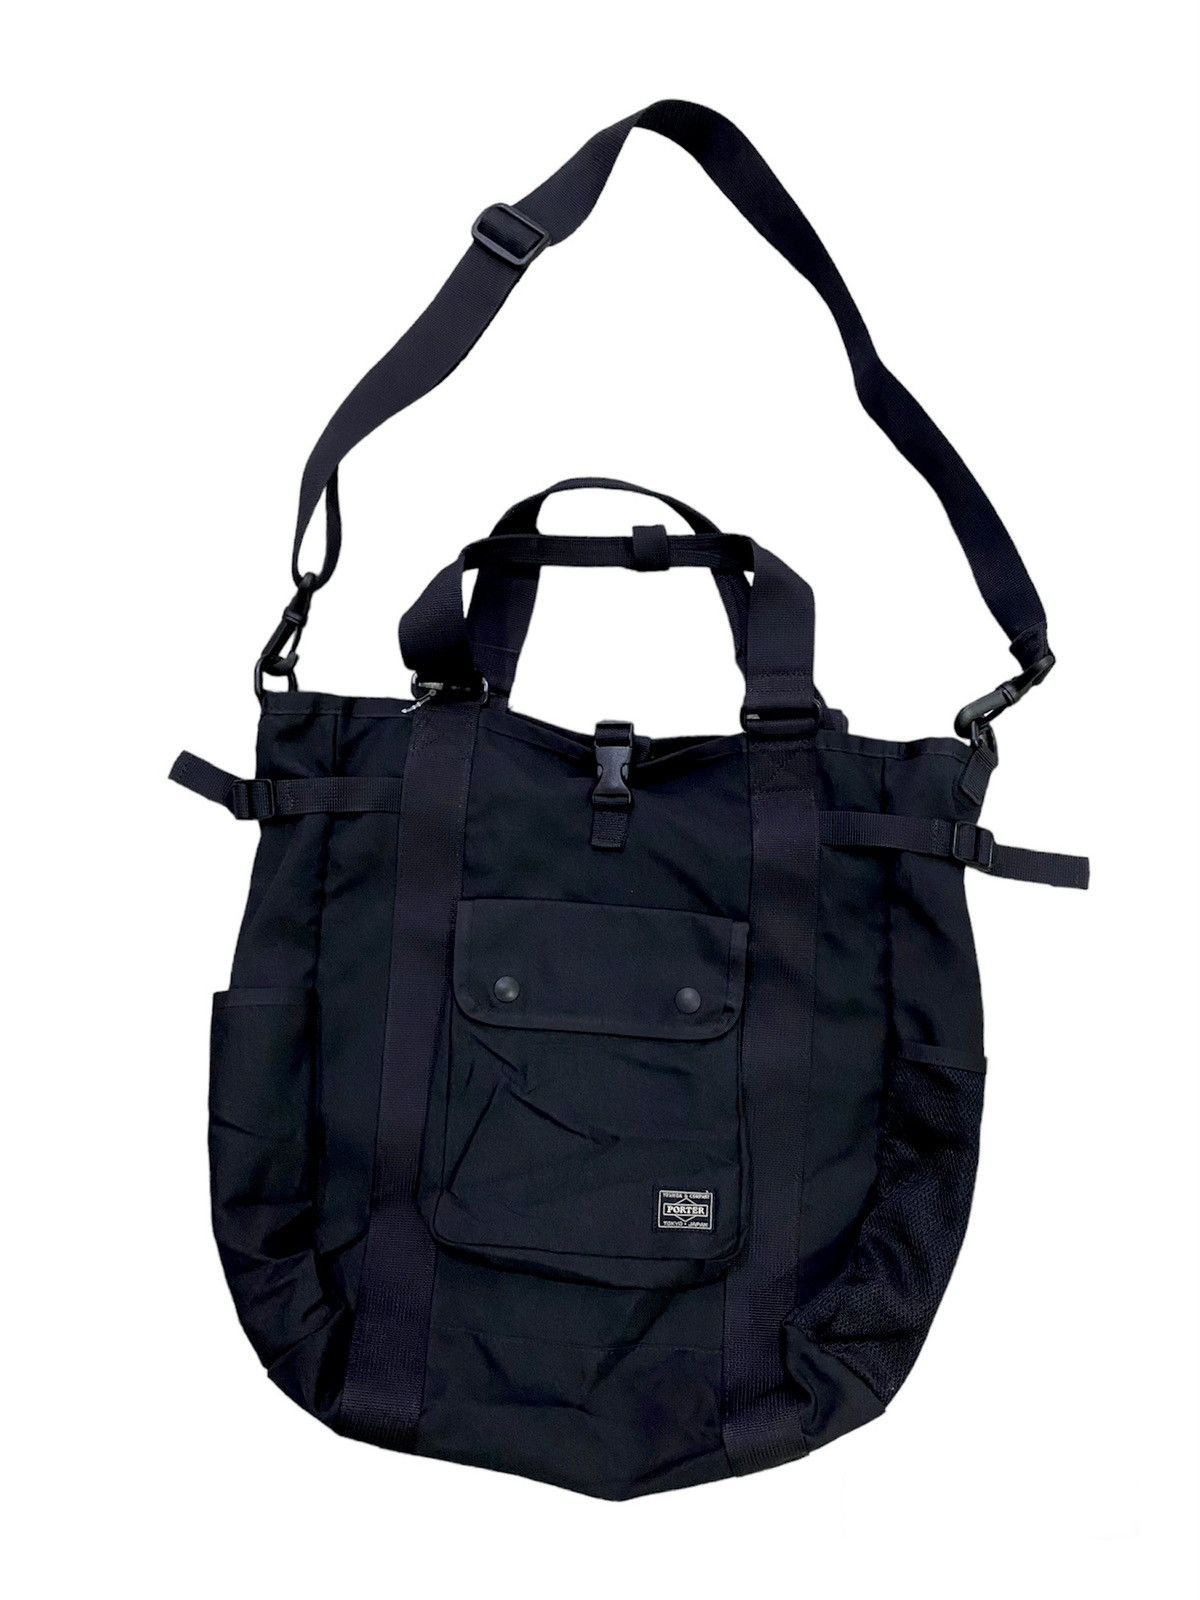 Porter Military 2 in 1 Travel/Outdoor Bag - 1